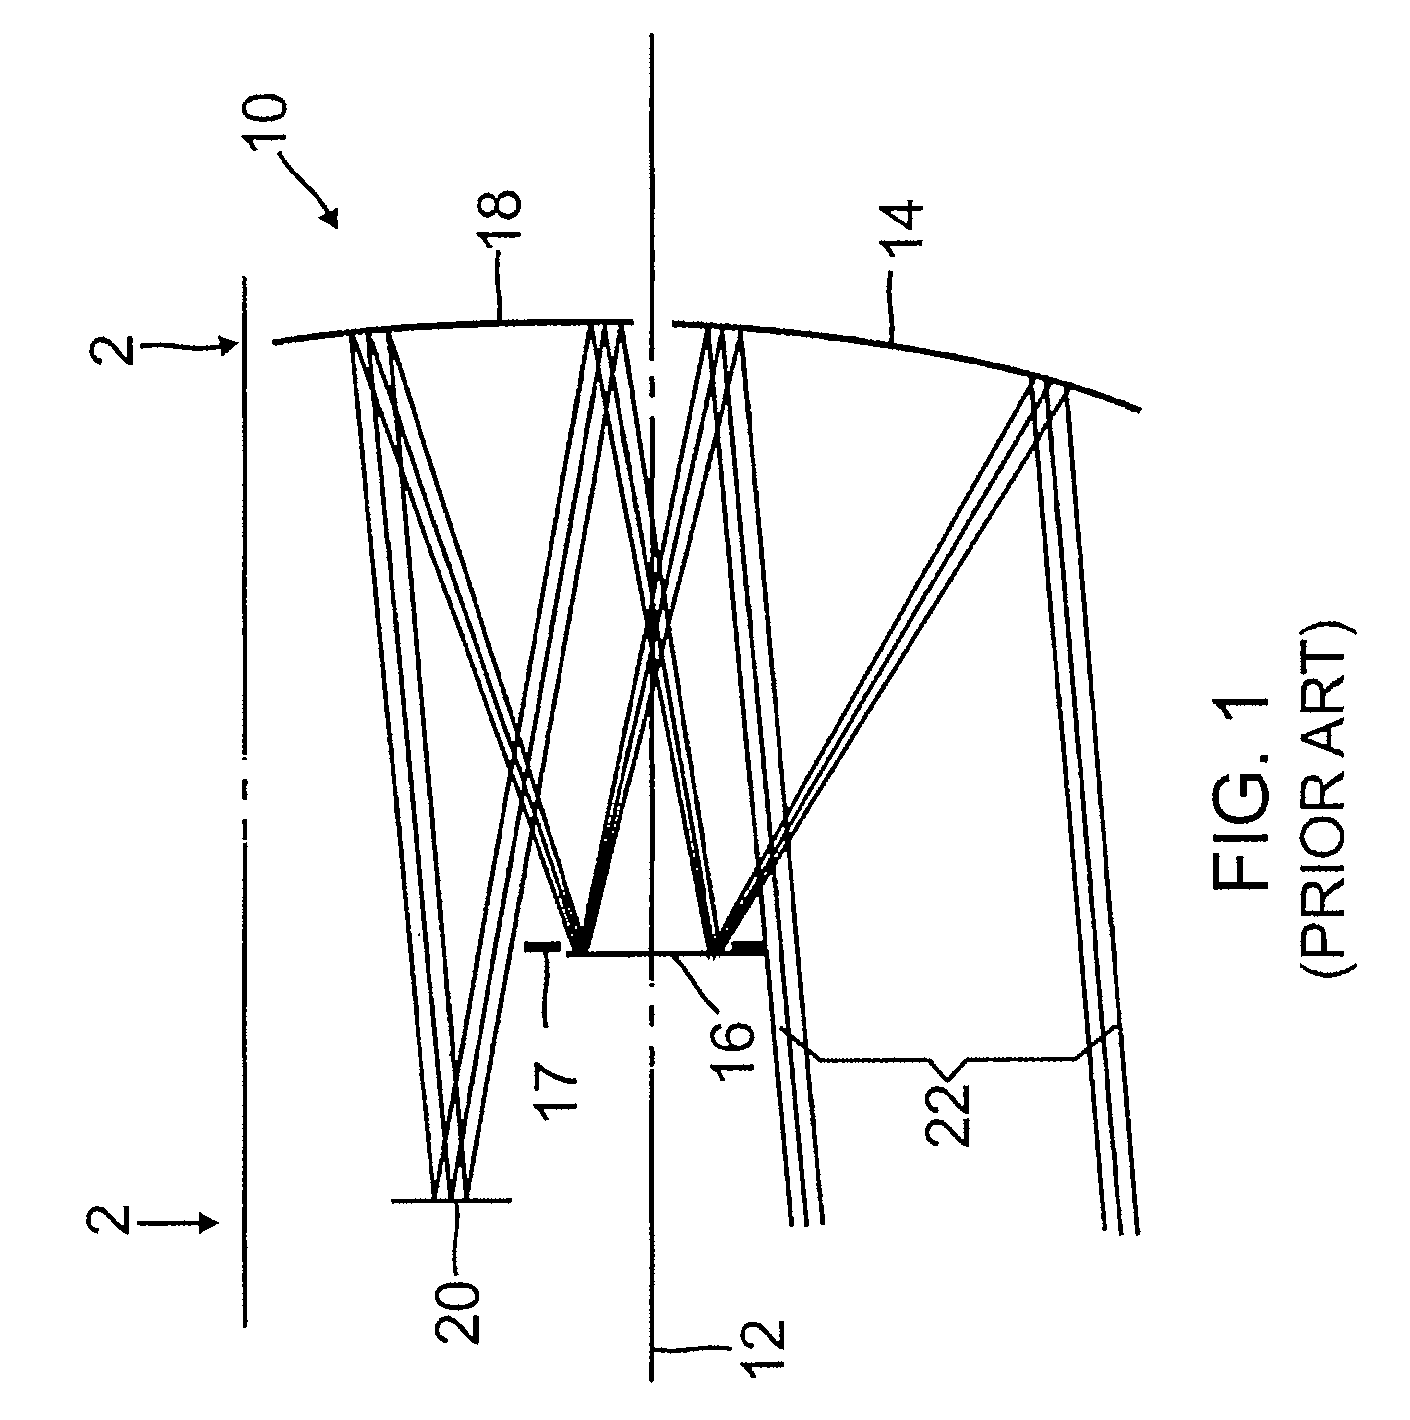 Reflective triplet optical form with external rear aperture stop for cold shielding